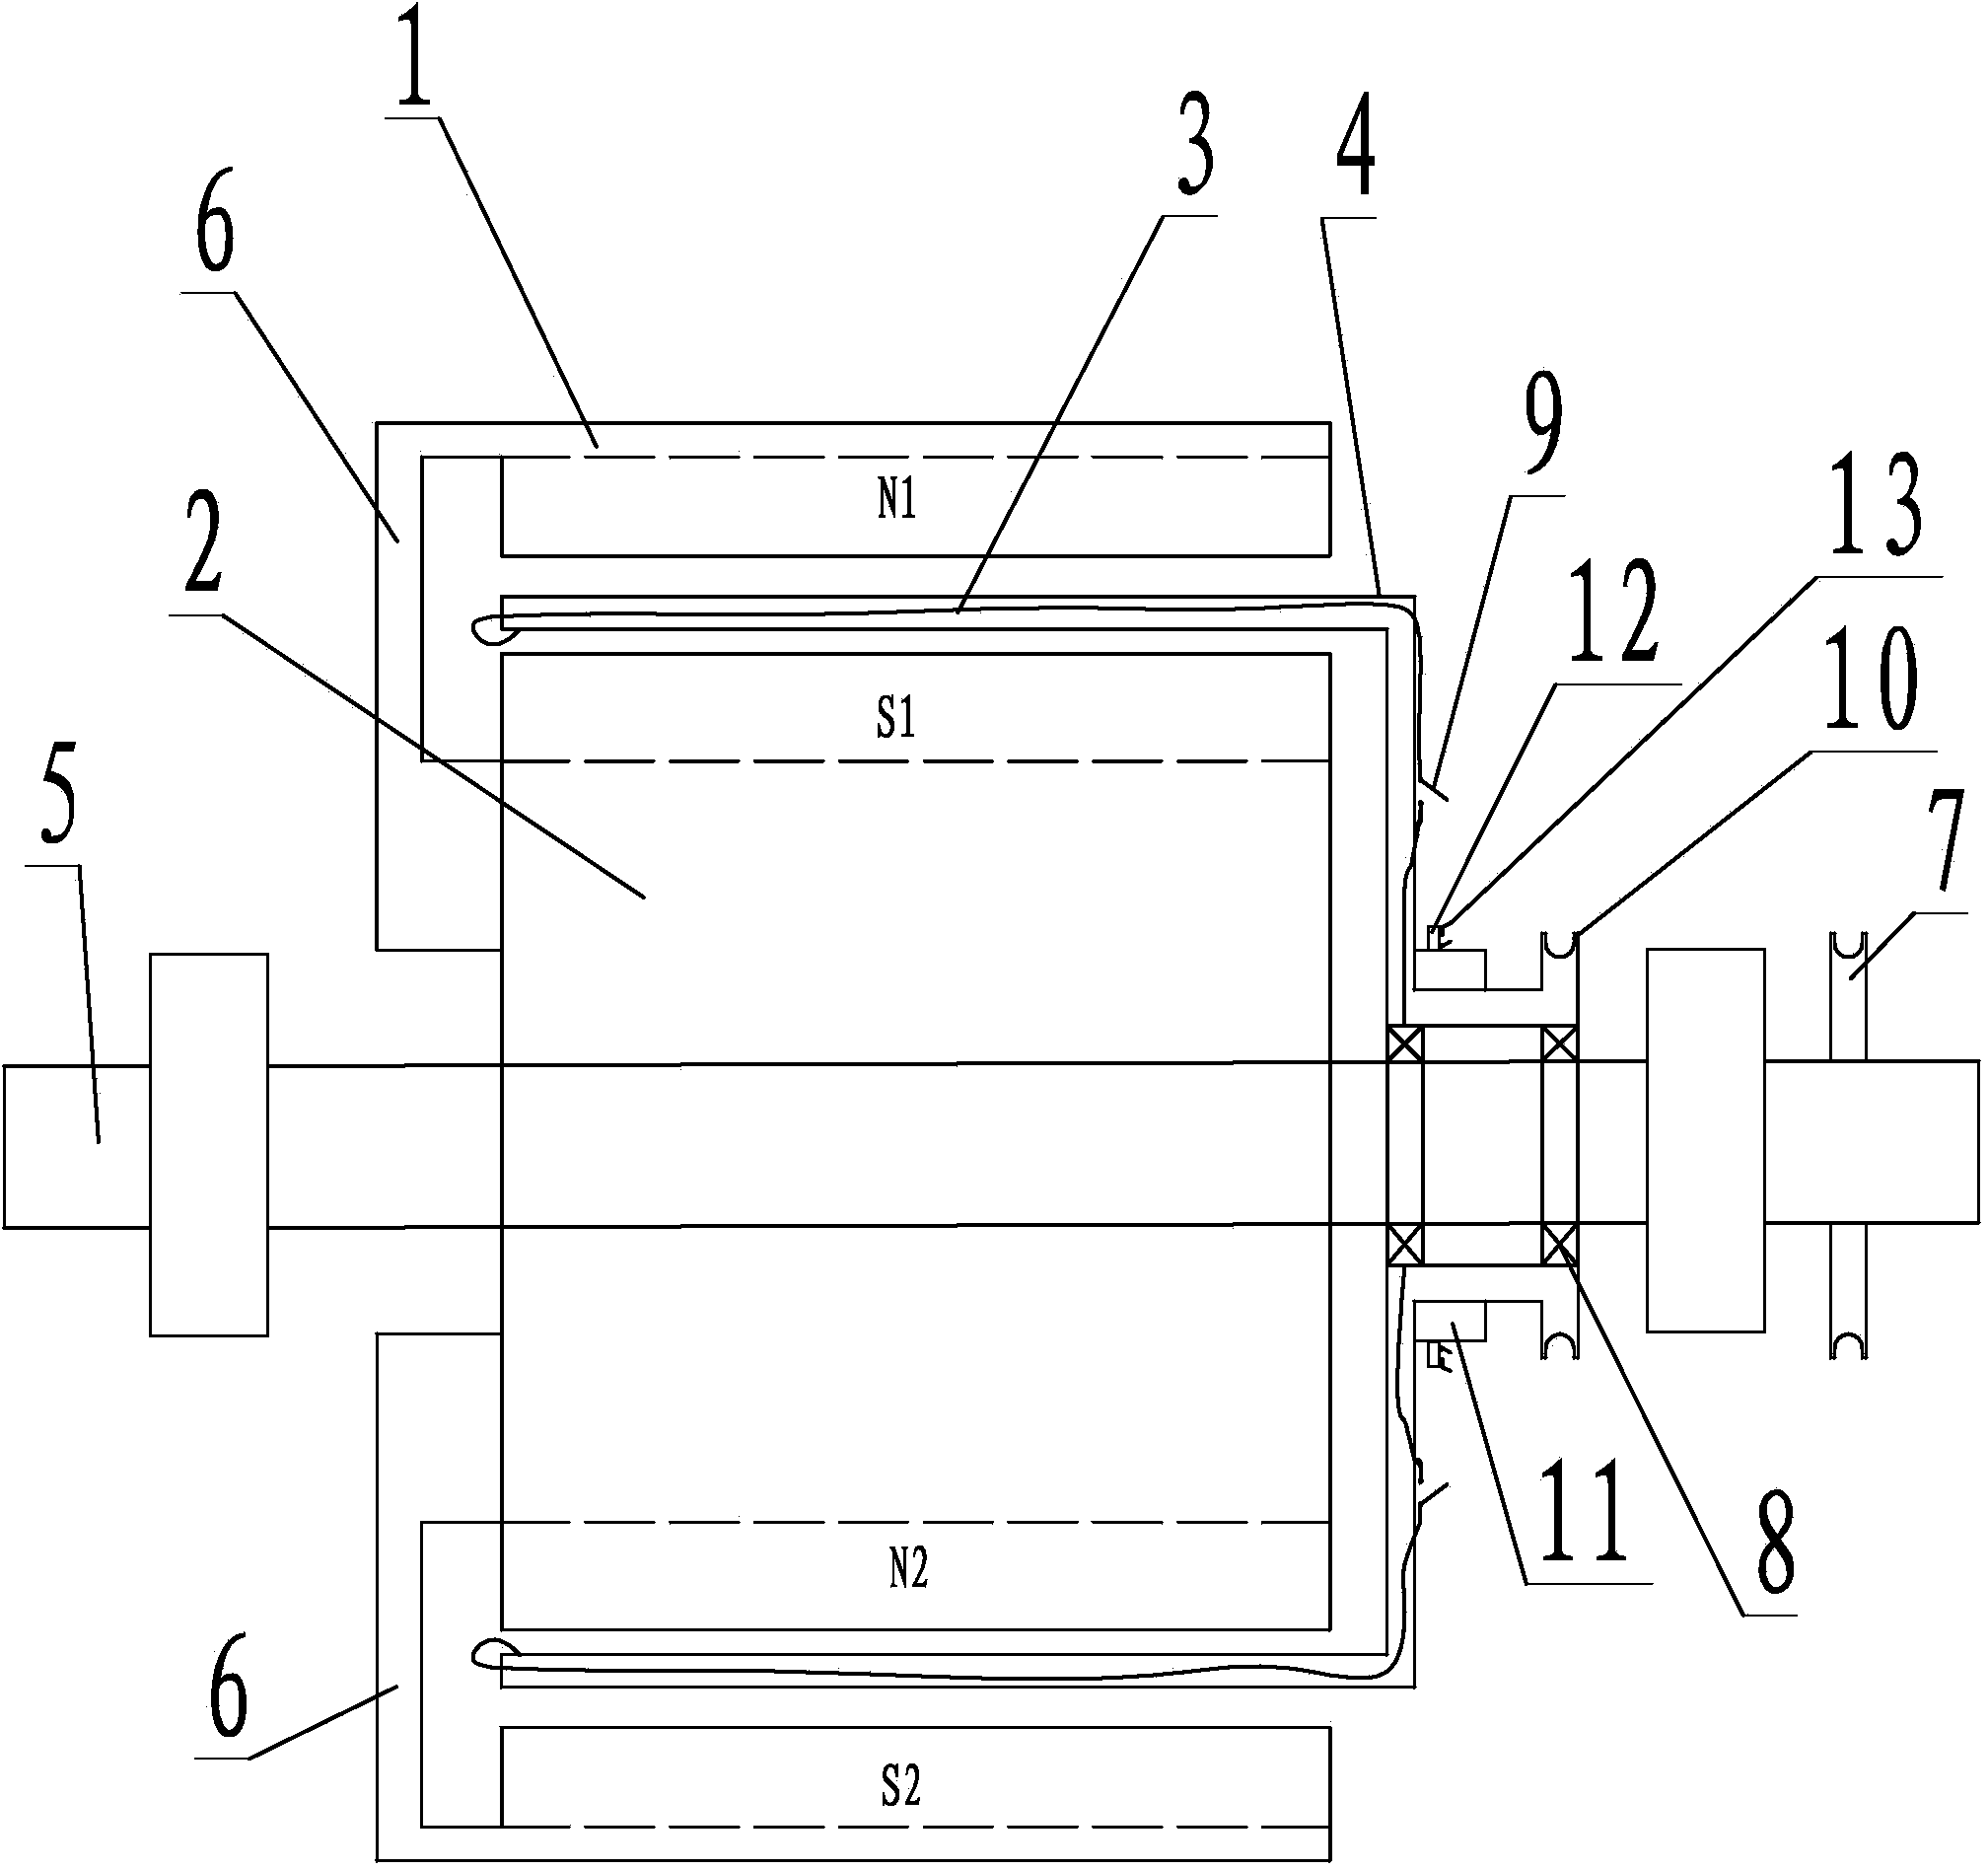 Reluctance-free double-current generator